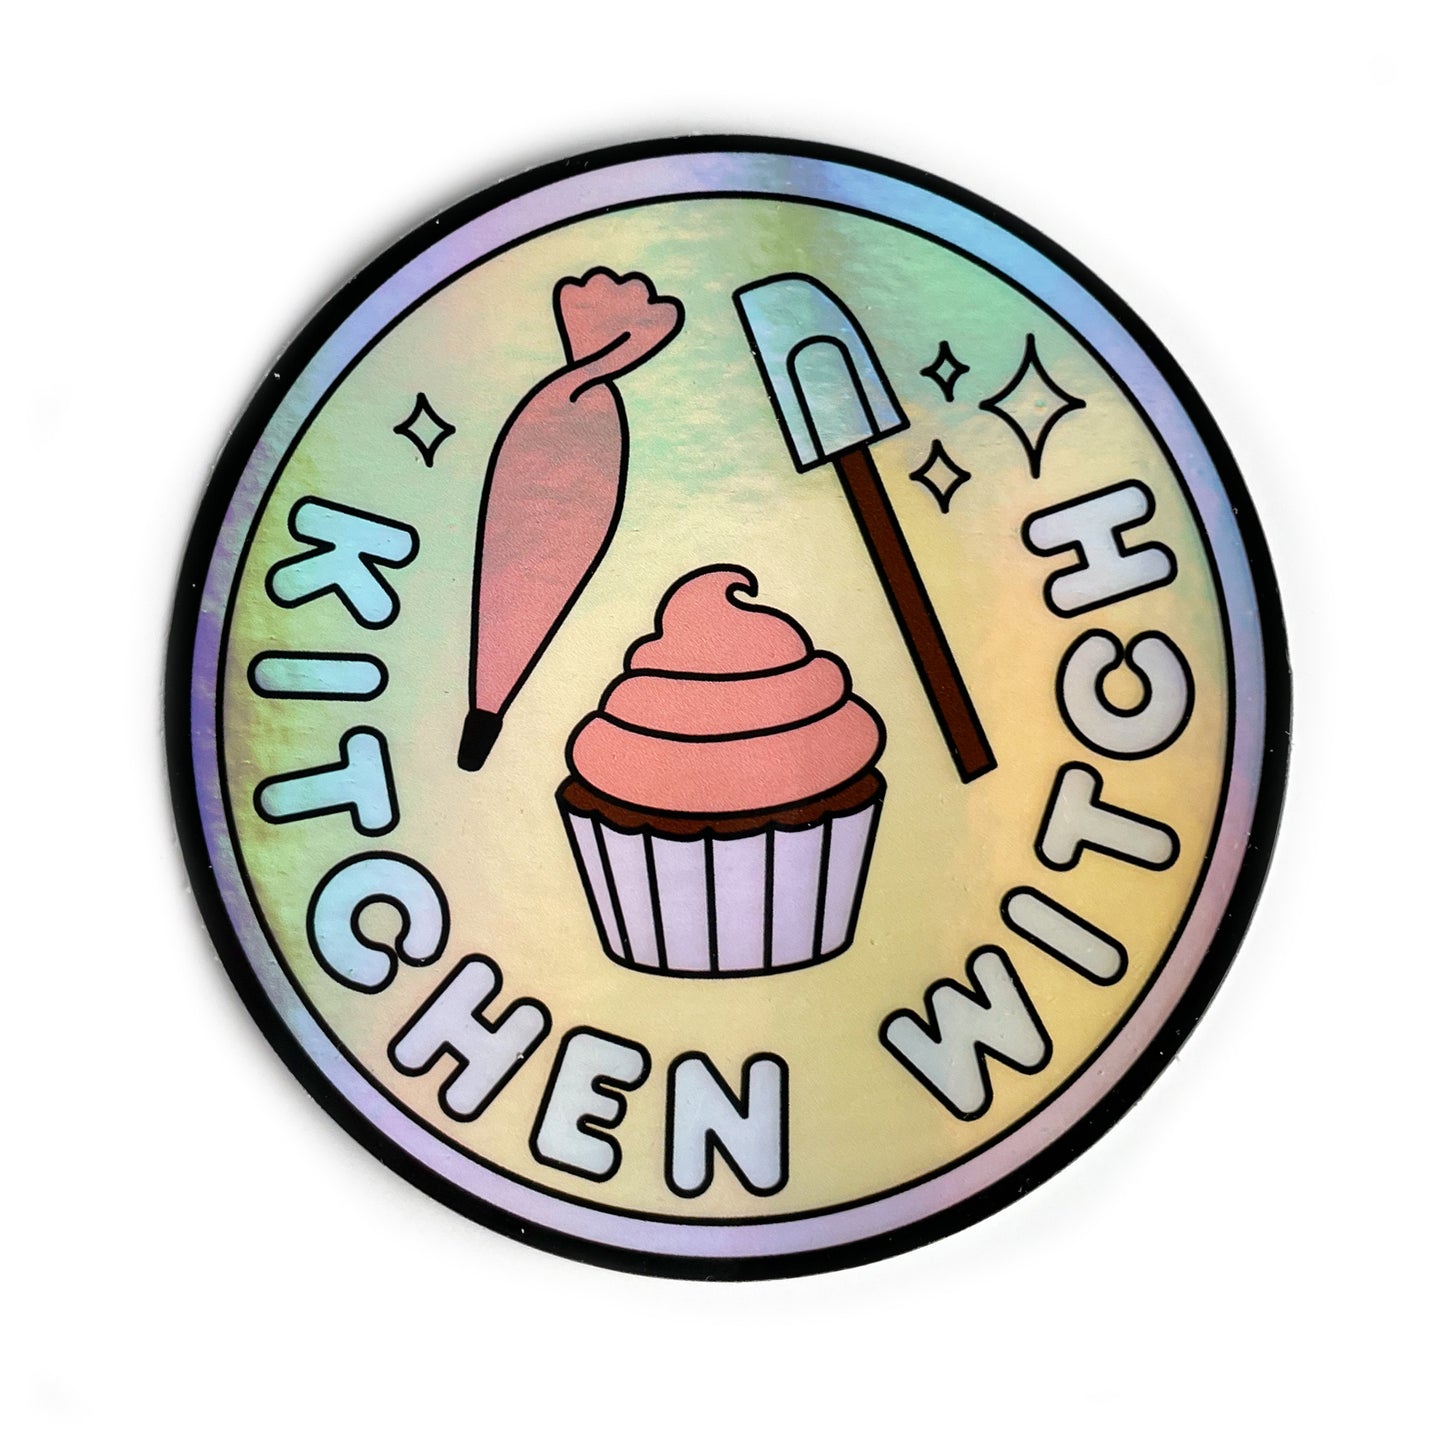 A circular holographic sticker with a lavender border and the words "Kitchen Witch" on it. It has a frosting piping bag, a cupcake, and a spatula on it.